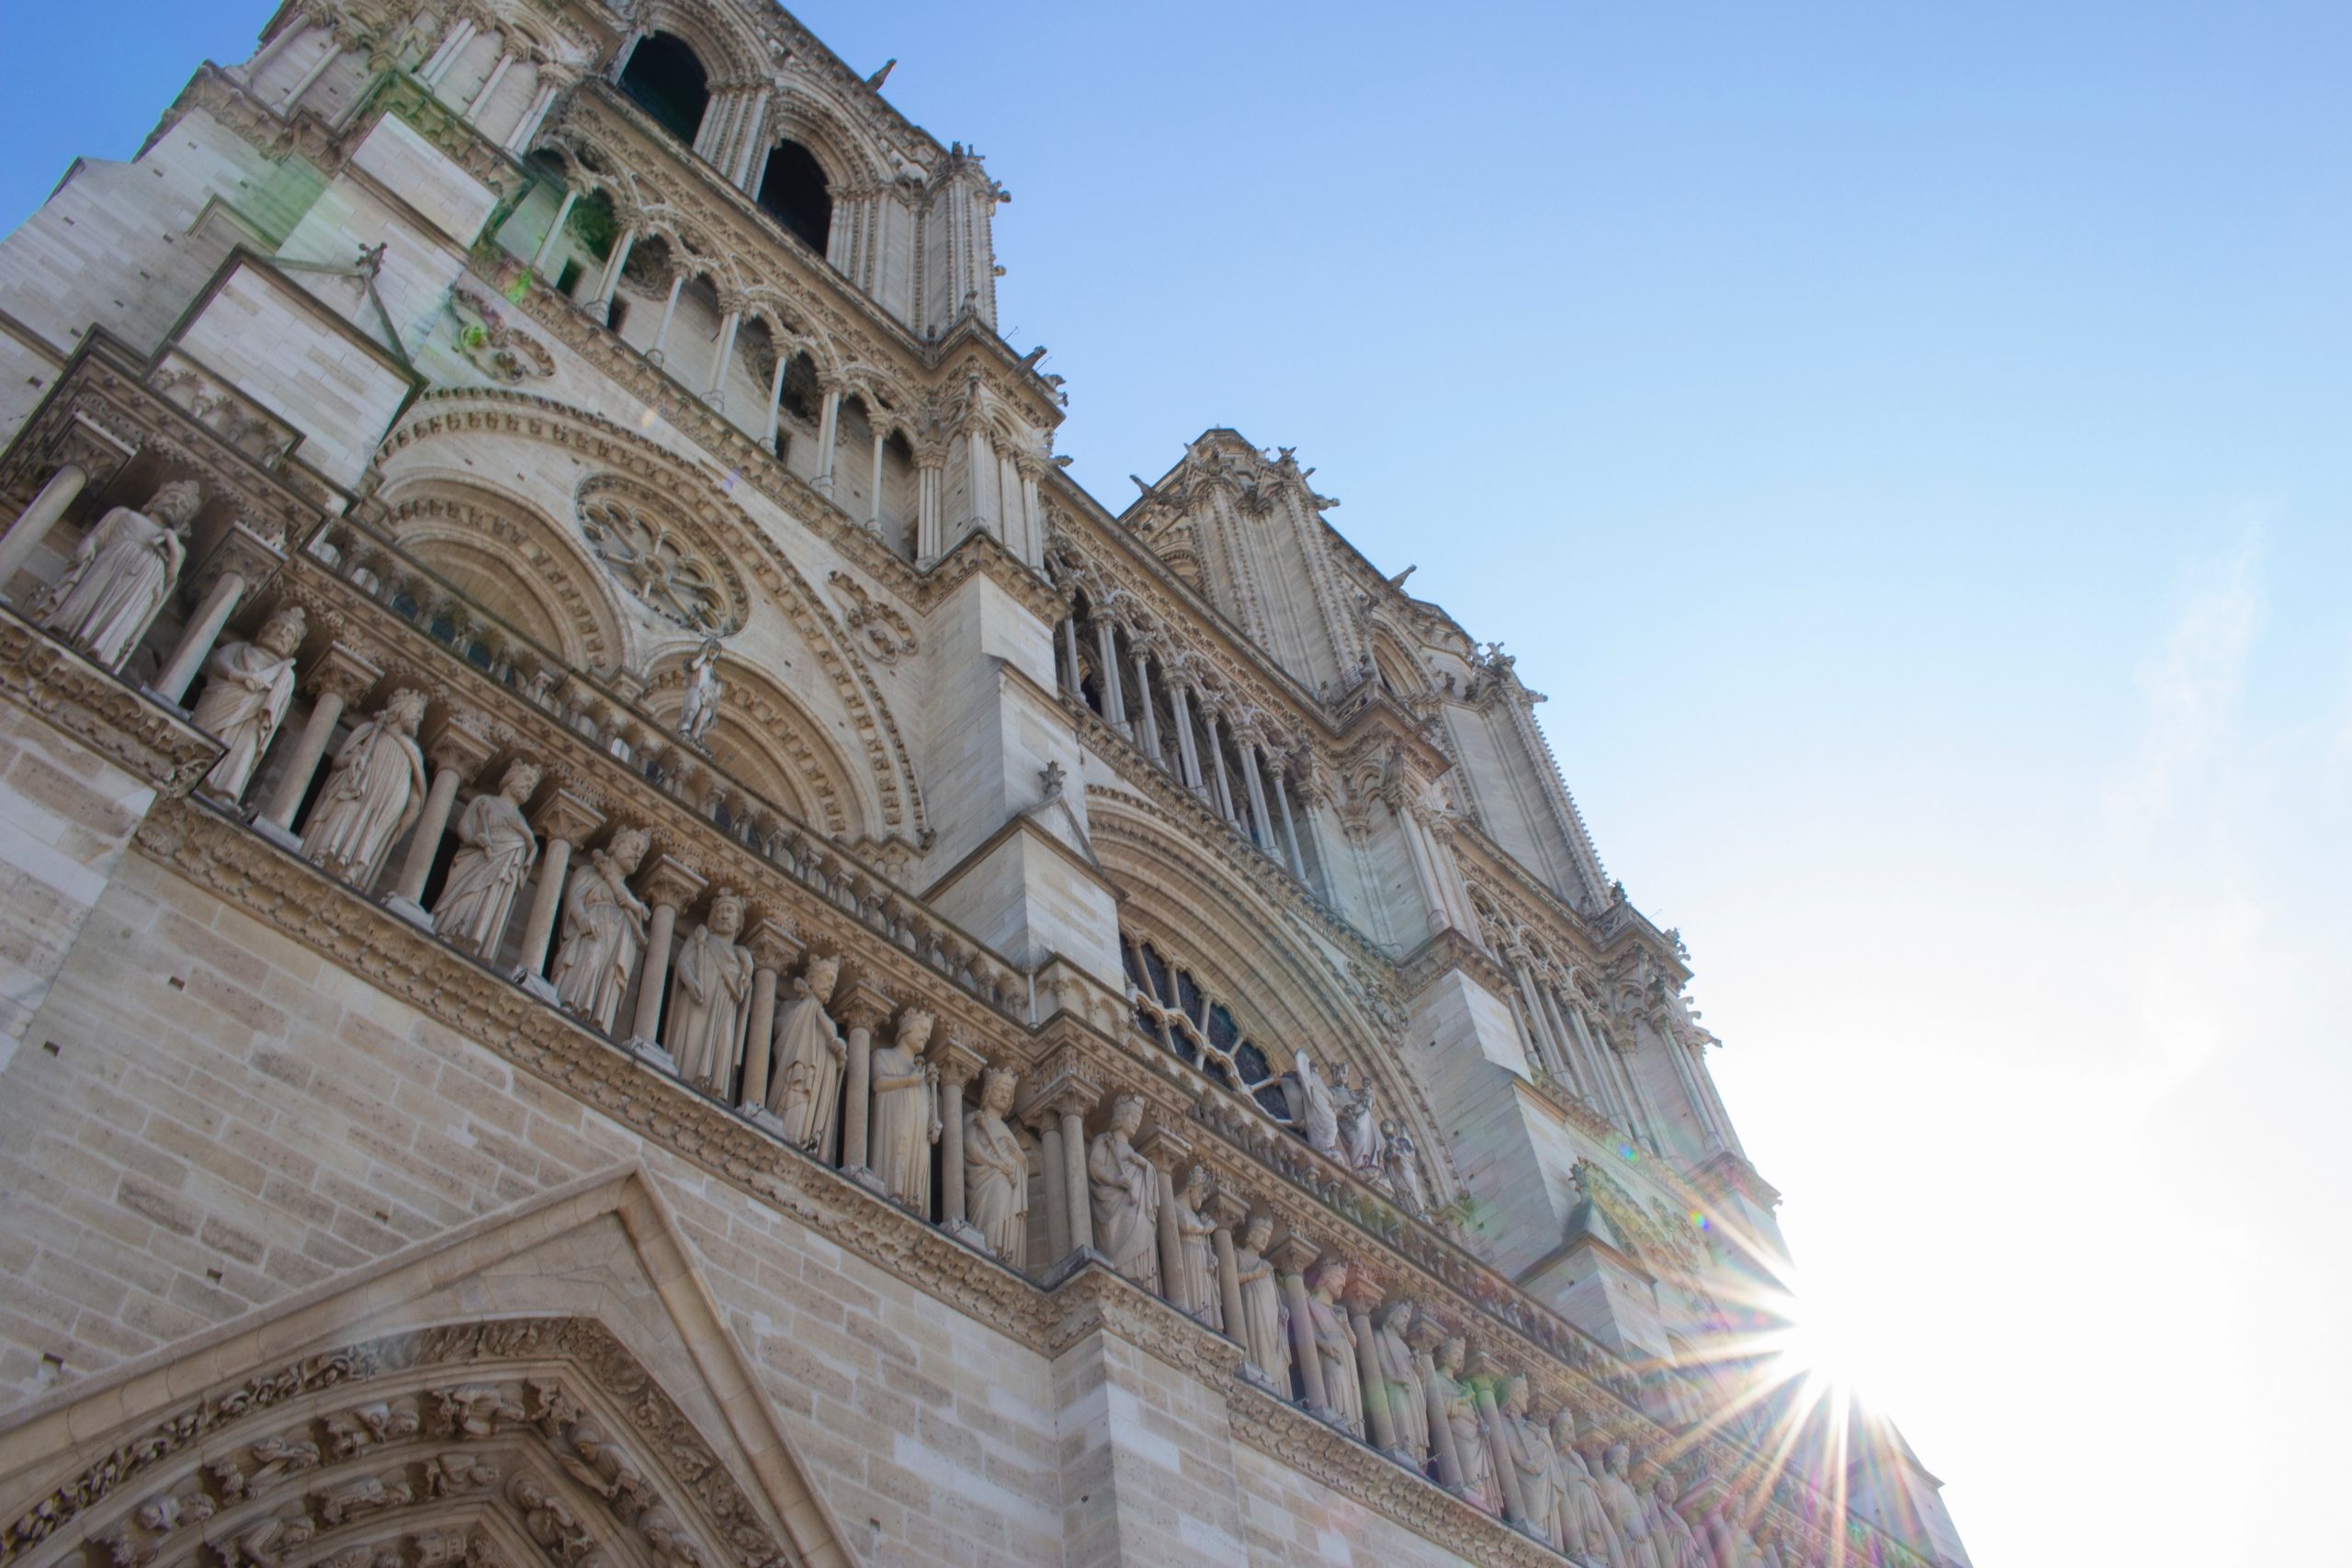 Notre Dame is one of the most interesting places to visit in Paris